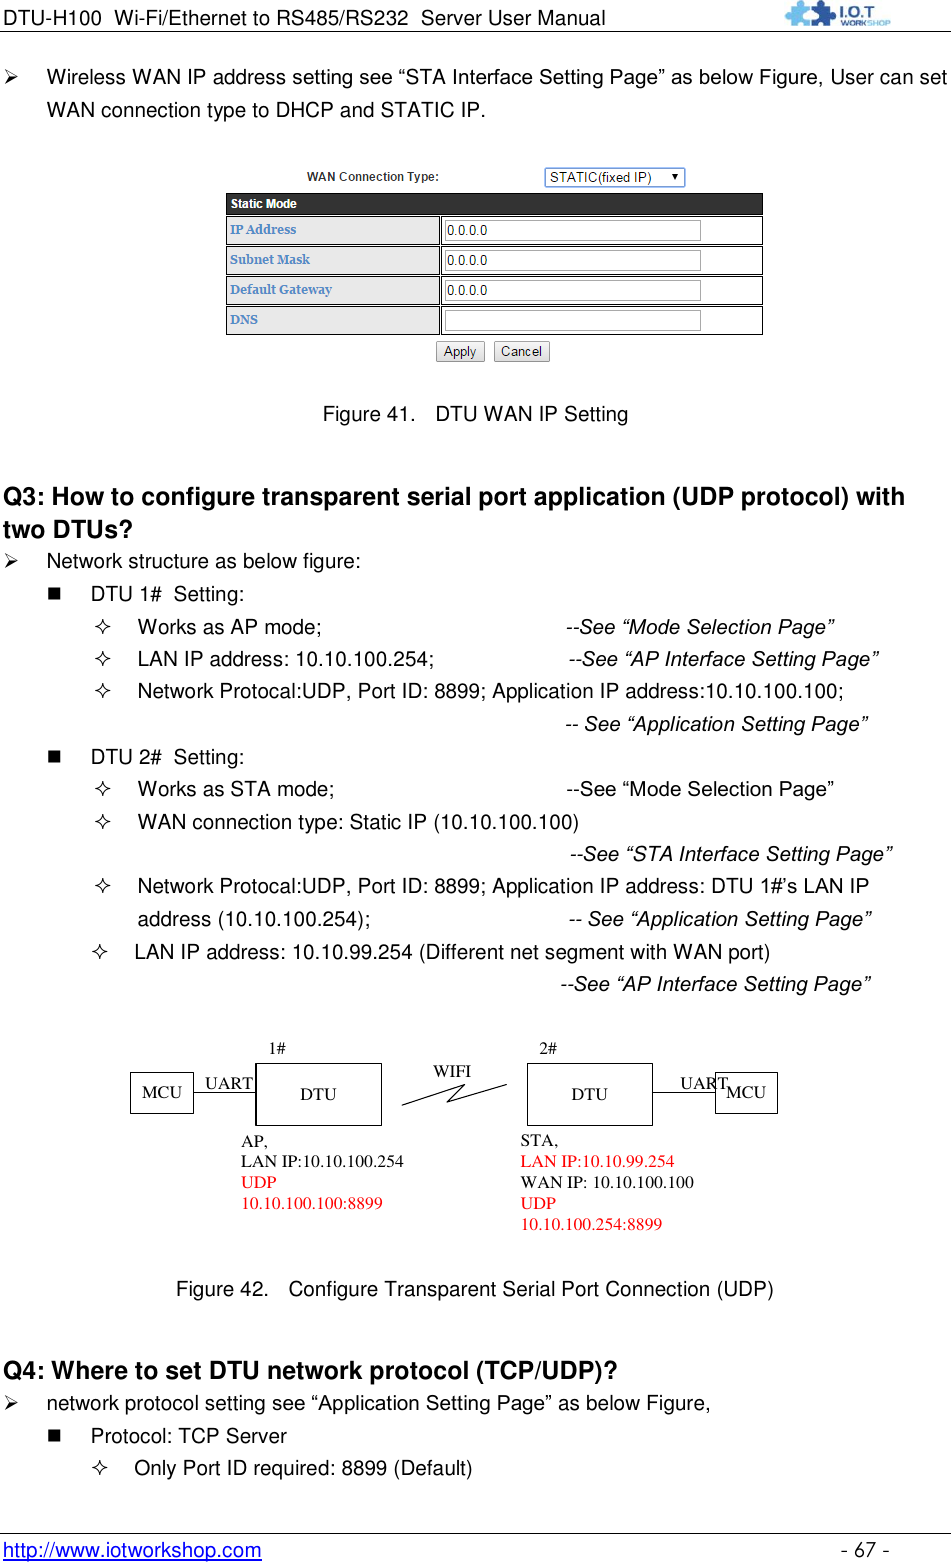 DTU-H100 Wi-Fi/Ethernet to RS485/RS232  Server User Manual    http://www.iotworkshop.com    - 67 -  Wireless WAN IP address setting see “STA Interface Setting Page” as below Figure, User can set WAN connection type to DHCP and STATIC IP.   Figure 41. DTU WAN IP Setting Q3: How to configure transparent serial port application (UDP protocol) with two DTUs?  Network structure as below figure:  DTU 1#  Setting:  Works as AP mode;                                          --See “Mode Selection Page”  LAN IP address: 10.10.100.254;                       --See “AP Interface Setting Page”   Network Protocal:UDP, Port ID: 8899; Application IP address:10.10.100.100;   -- See “Application Setting Page”   DTU 2#  Setting:  Works as STA mode;                                        --See “Mode Selection Page”  WAN connection type: Static IP (10.10.100.100)                                                                                   --See “STA Interface Setting Page”                                                                Network Protocal:UDP, Port ID: 8899; Application IP address: DTU 1#‟s LAN IP address (10.10.100.254);                                  -- See “Application Setting Page”  LAN IP address: 10.10.99.254 (Different net segment with WAN port) --See “AP Interface Setting Page”  DTUAP, LAN IP:10.10.100.254UDP10.10.100.100:8899DTUSTA, LAN IP:10.10.99.254WAN IP: 10.10.100.100UDP10.10.100.254:88991# 2#WIFI MCUMCU UARTUART Figure 42. Configure Transparent Serial Port Connection (UDP) Q4: Where to set DTU network protocol (TCP/UDP)?  network protocol setting see “Application Setting Page” as below Figure,  Protocol: TCP Server  Only Port ID required: 8899 (Default) 